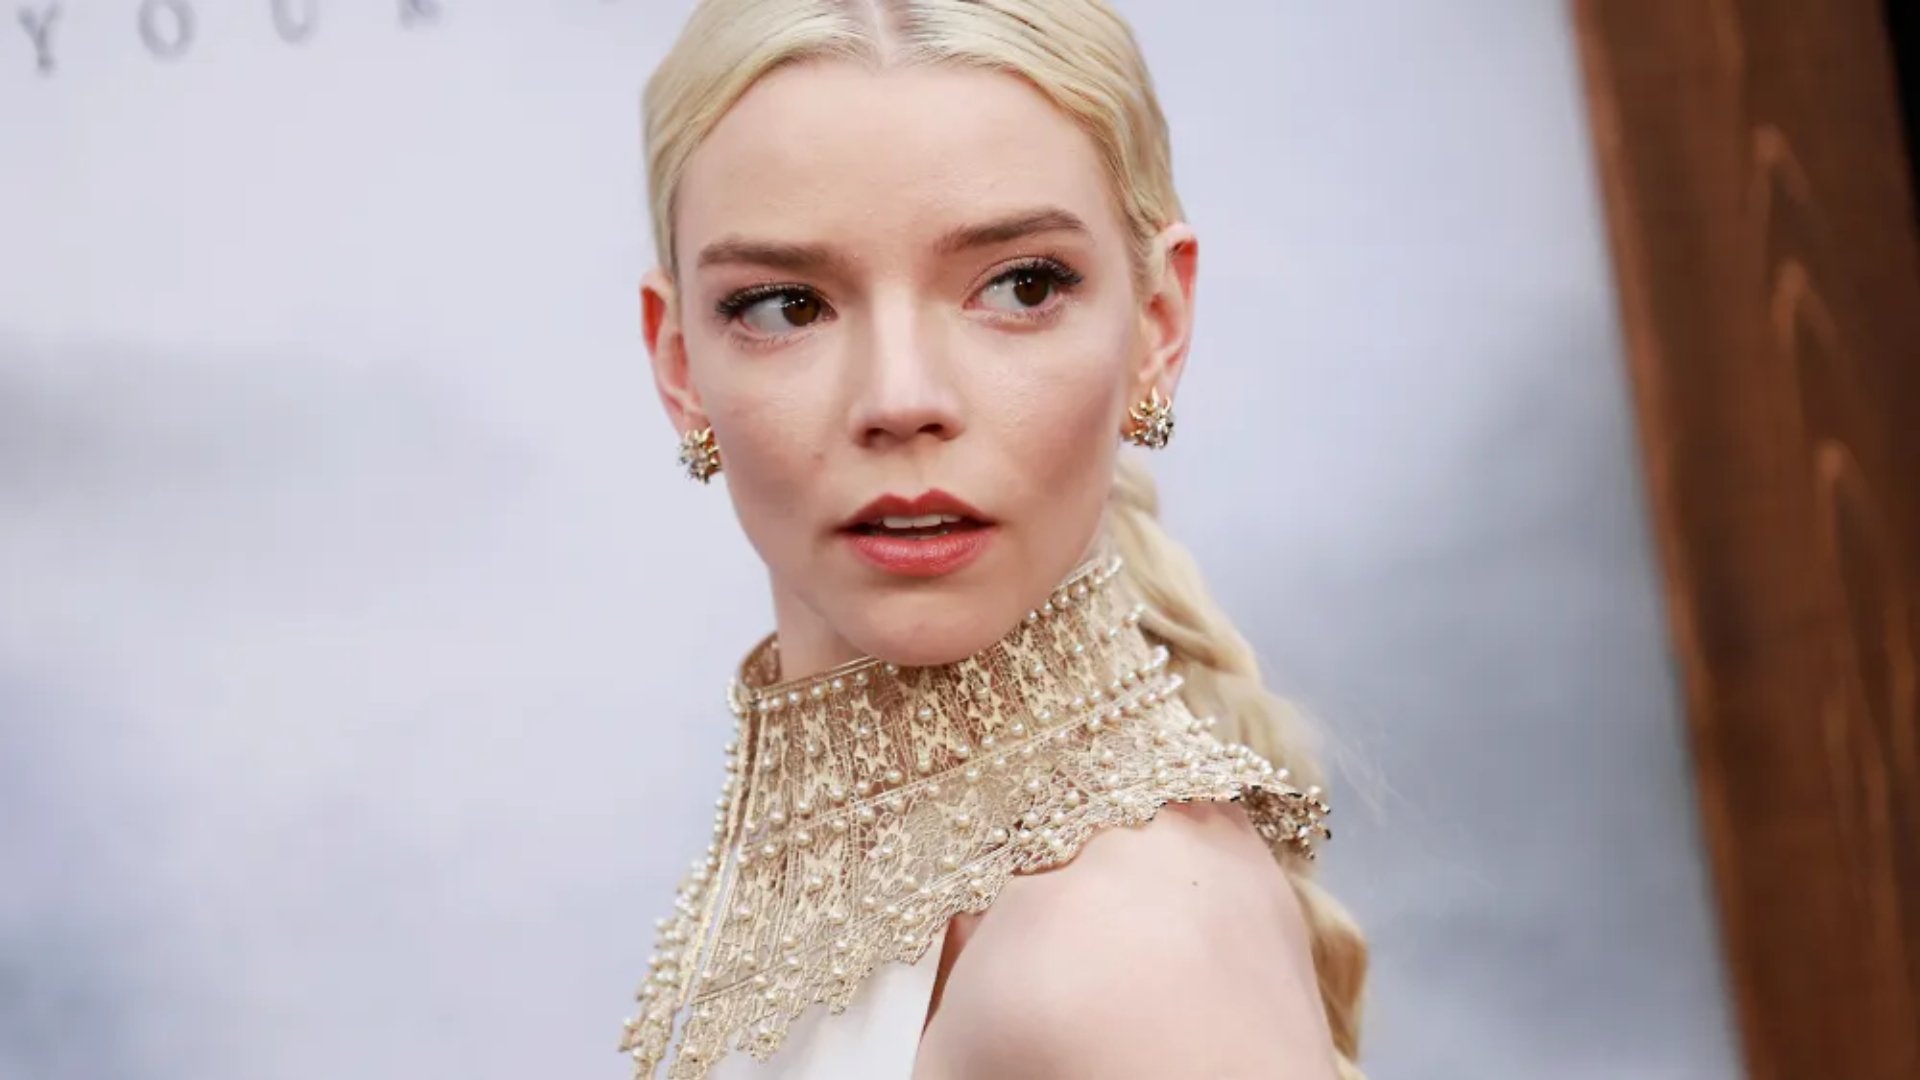 Anya Taylor Joy dazzled on Dune: Part Two premiere on Sunday in a black and golden gown but invited backlash